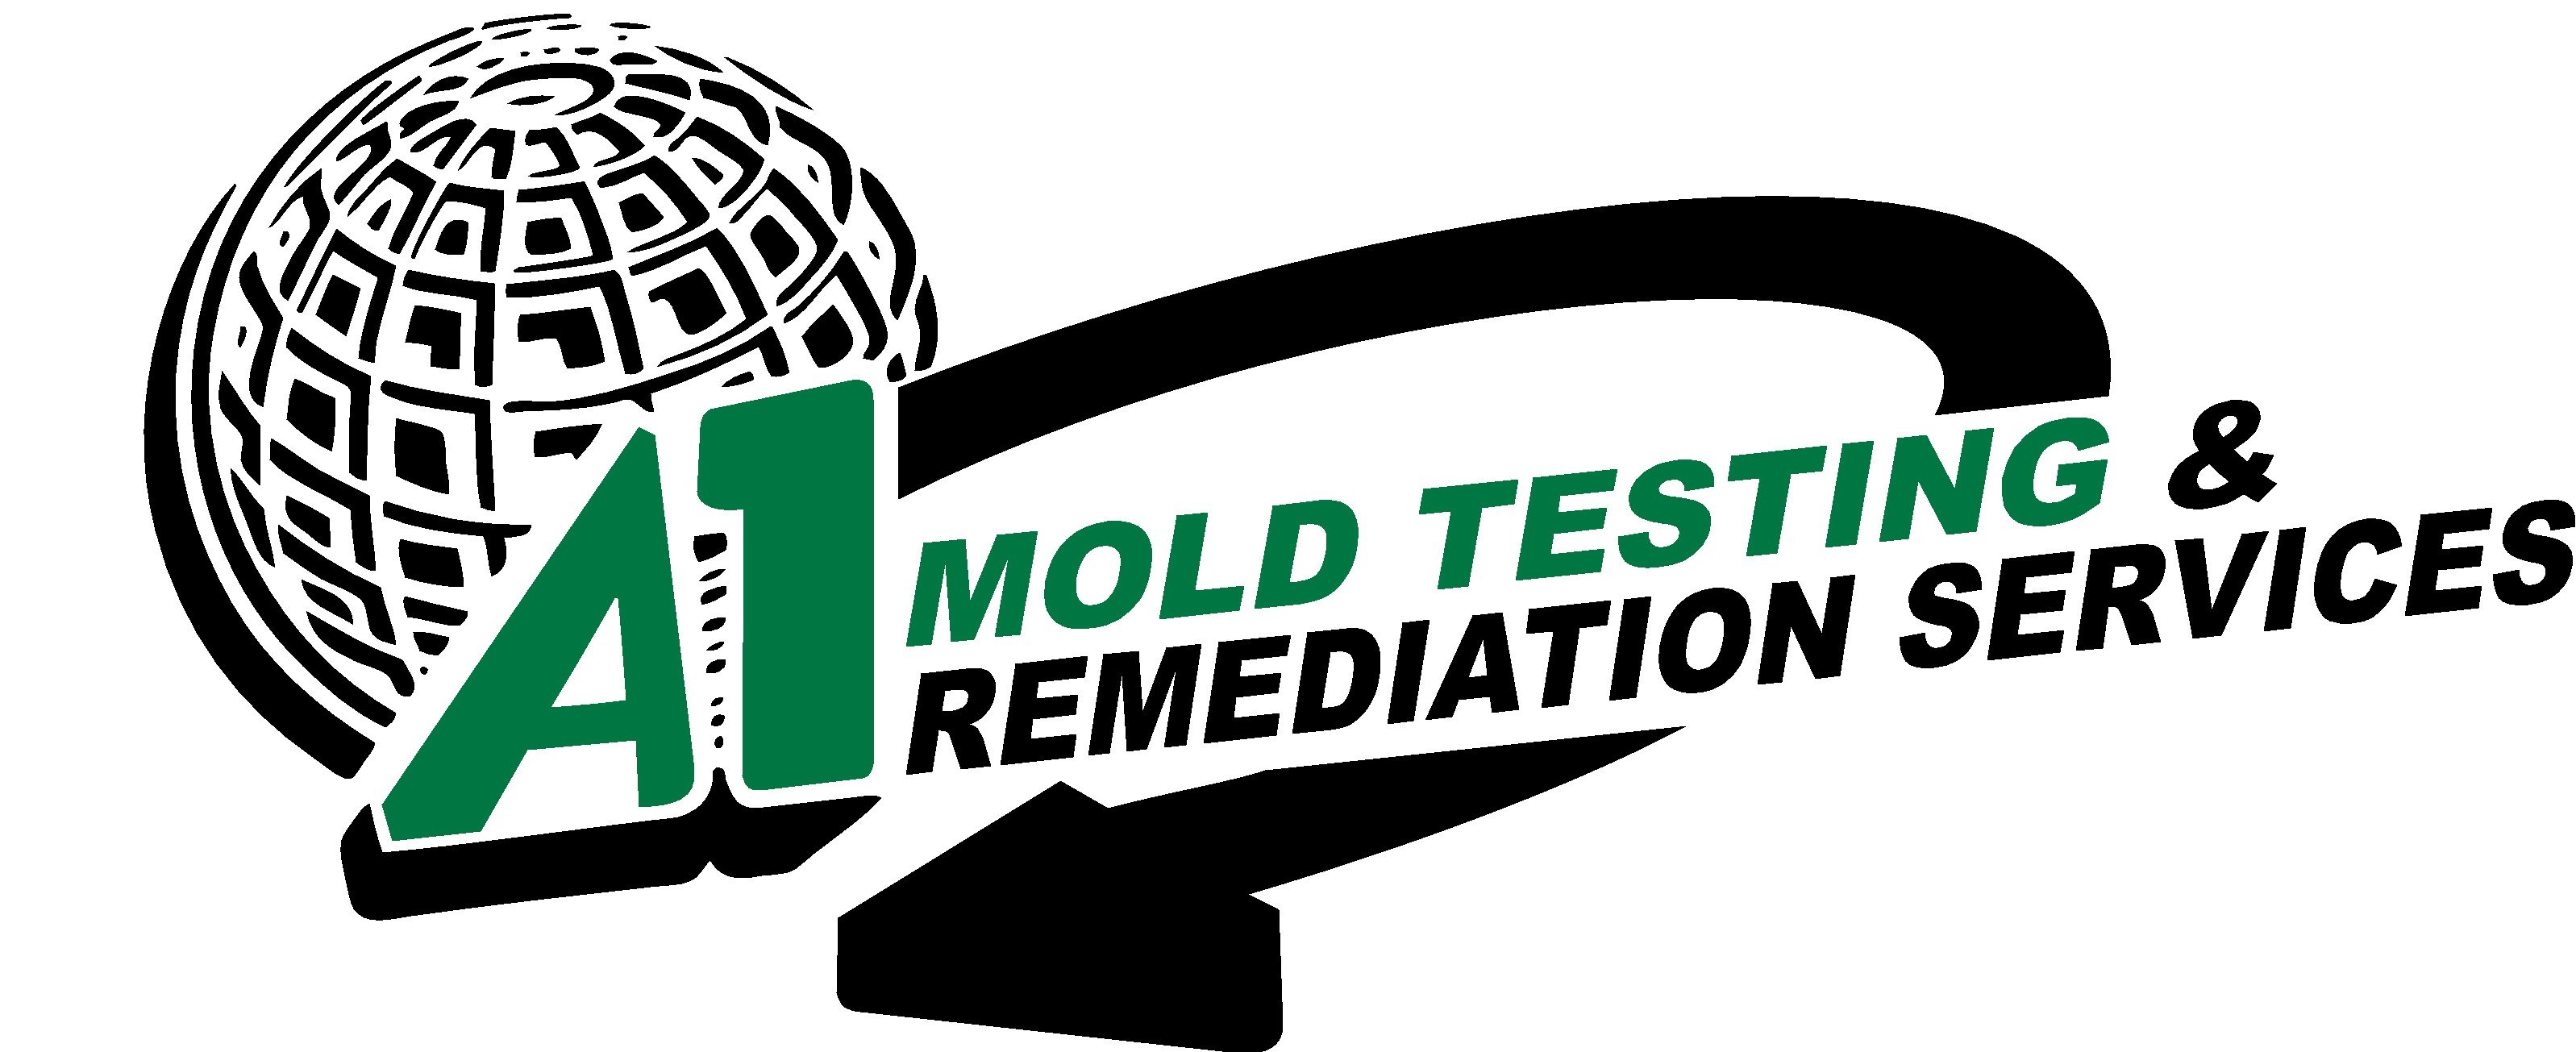 A1 Mold Testing & Remediation Services Logo